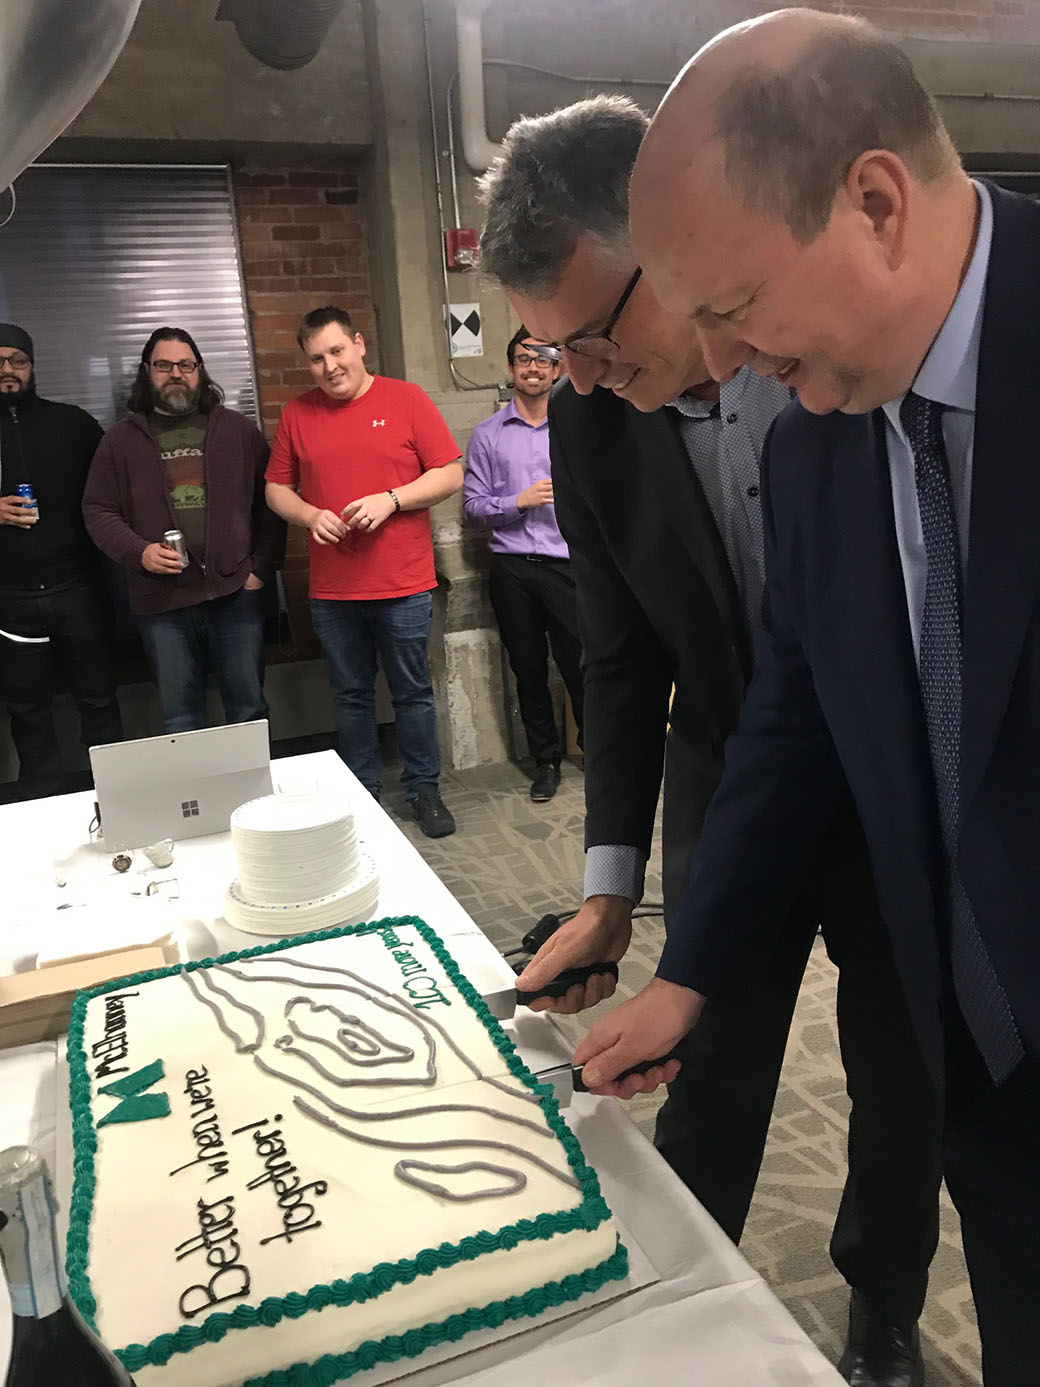 CEOs Allan Russell (left) and Bruce Winton (right) cutting the cake to celebrate